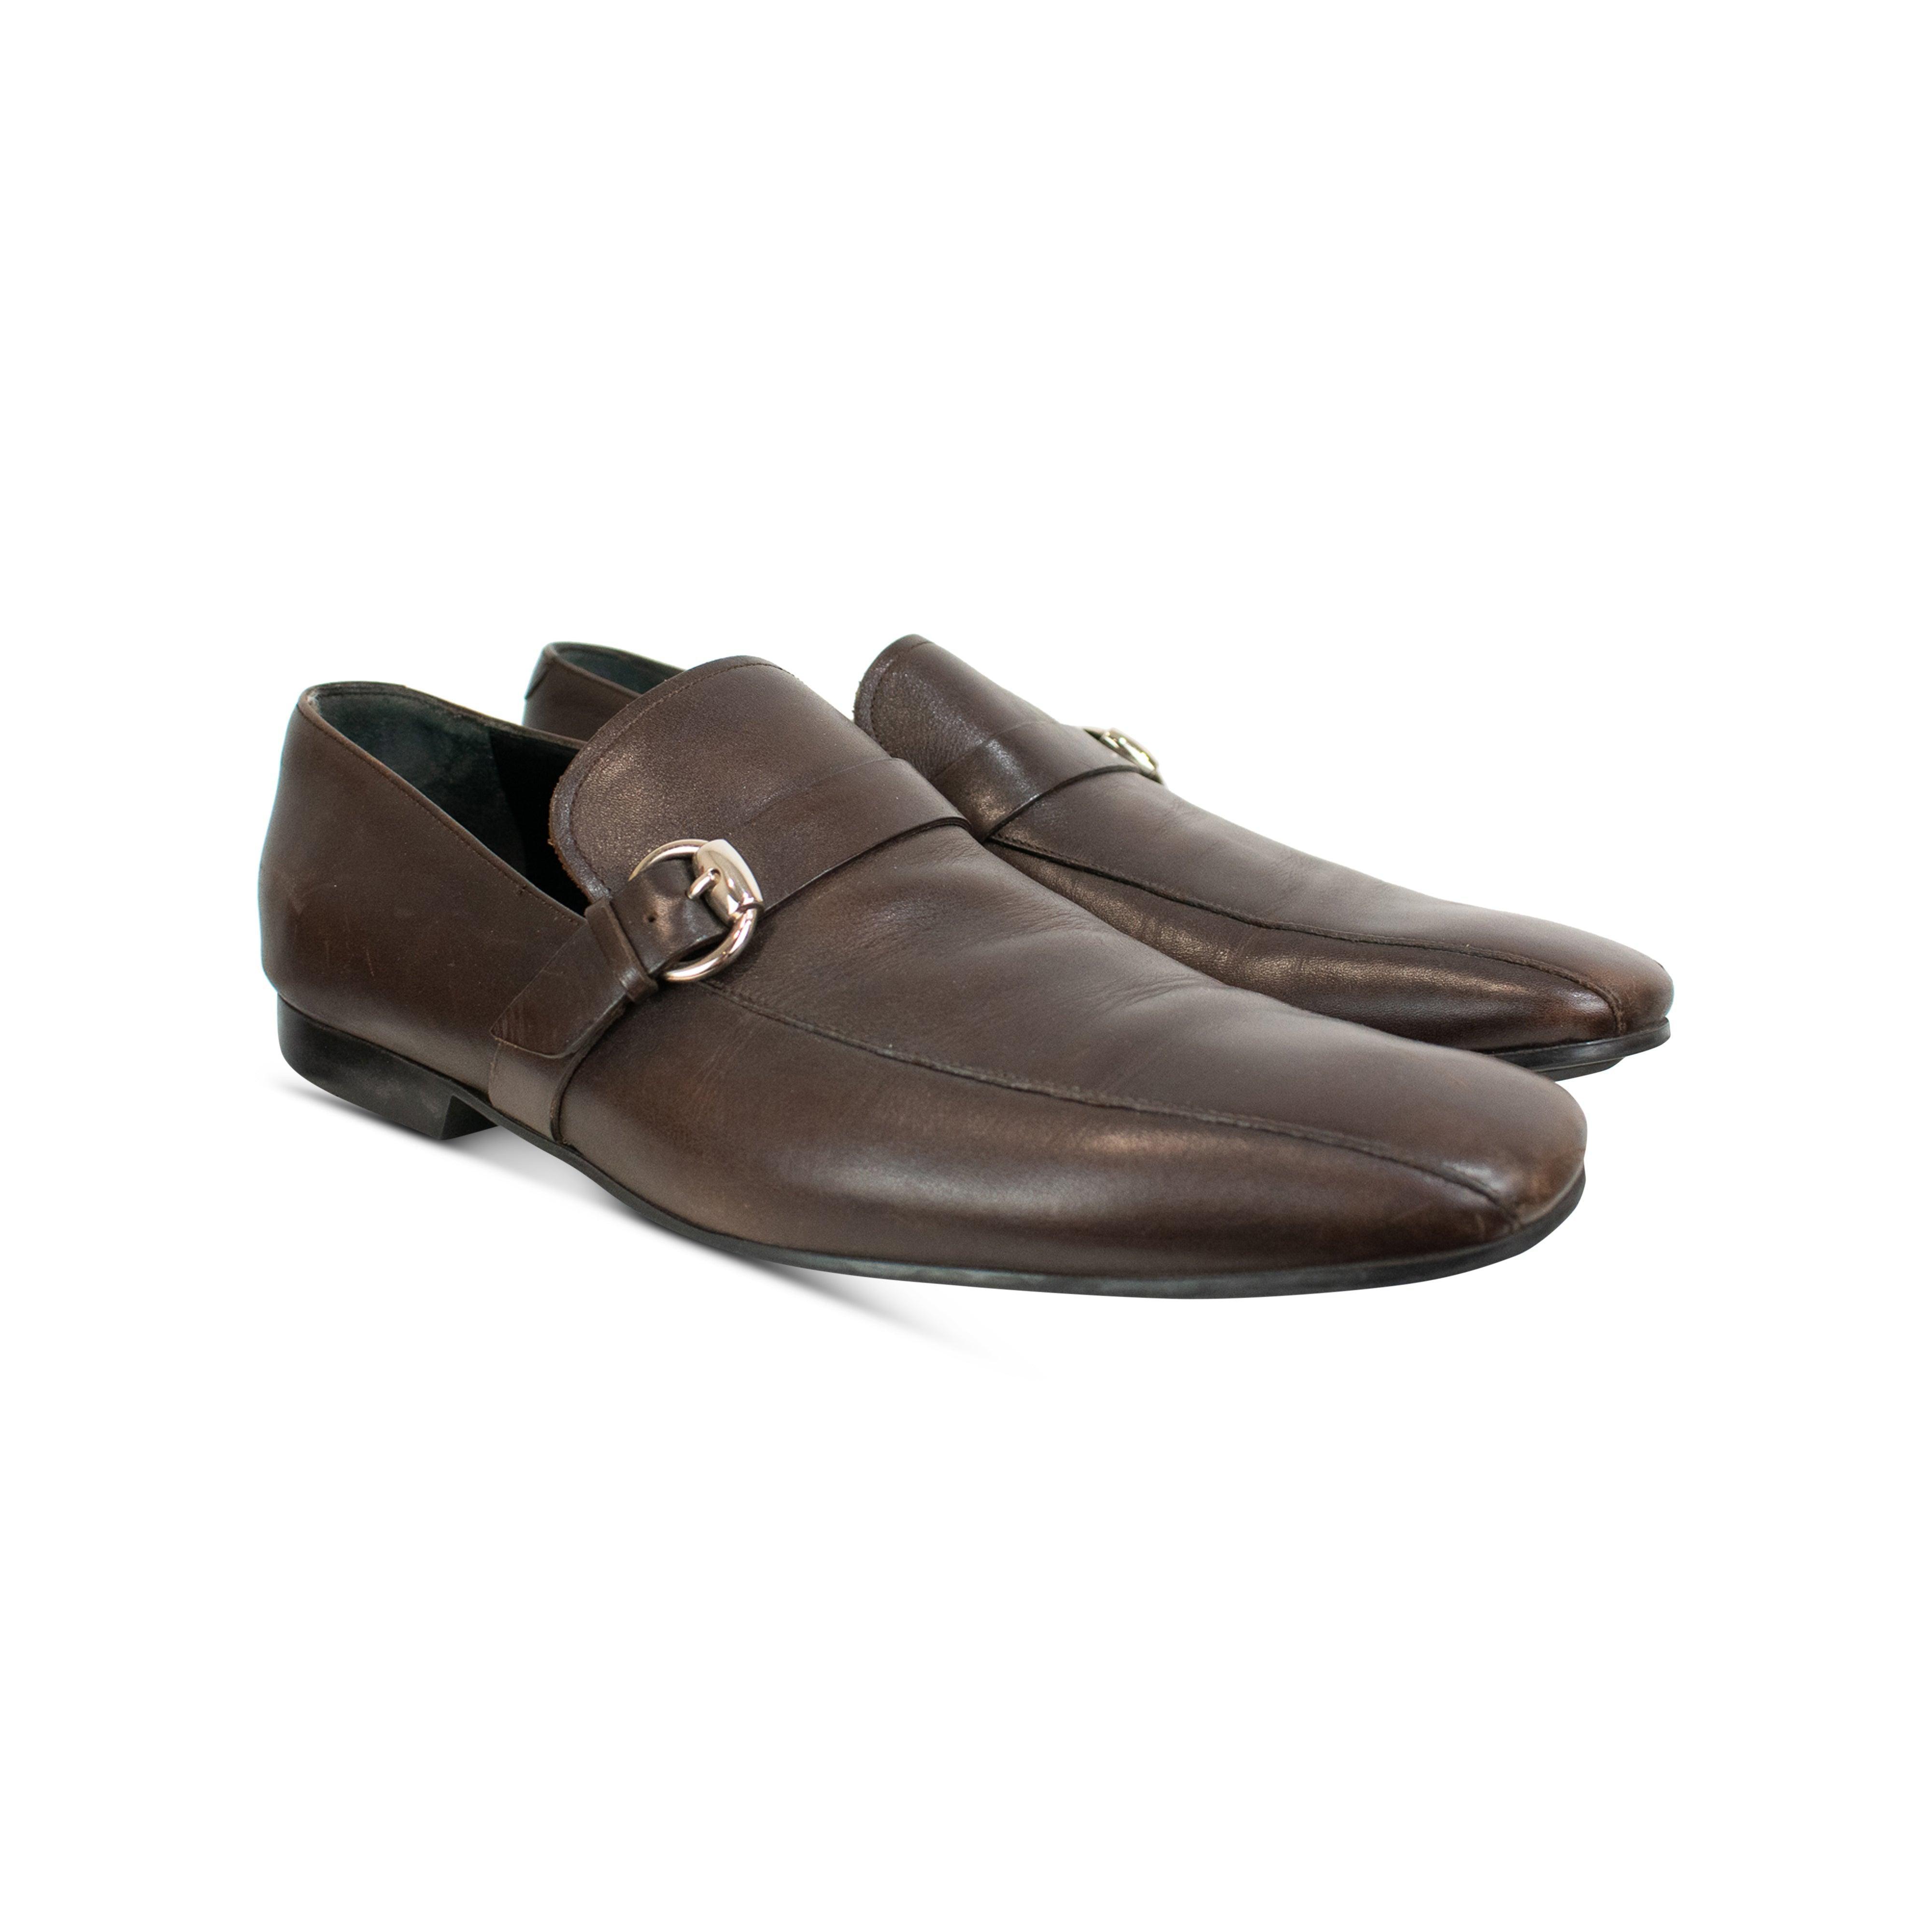 Gucci Loafers - Men's 43 - Fashionably Yours